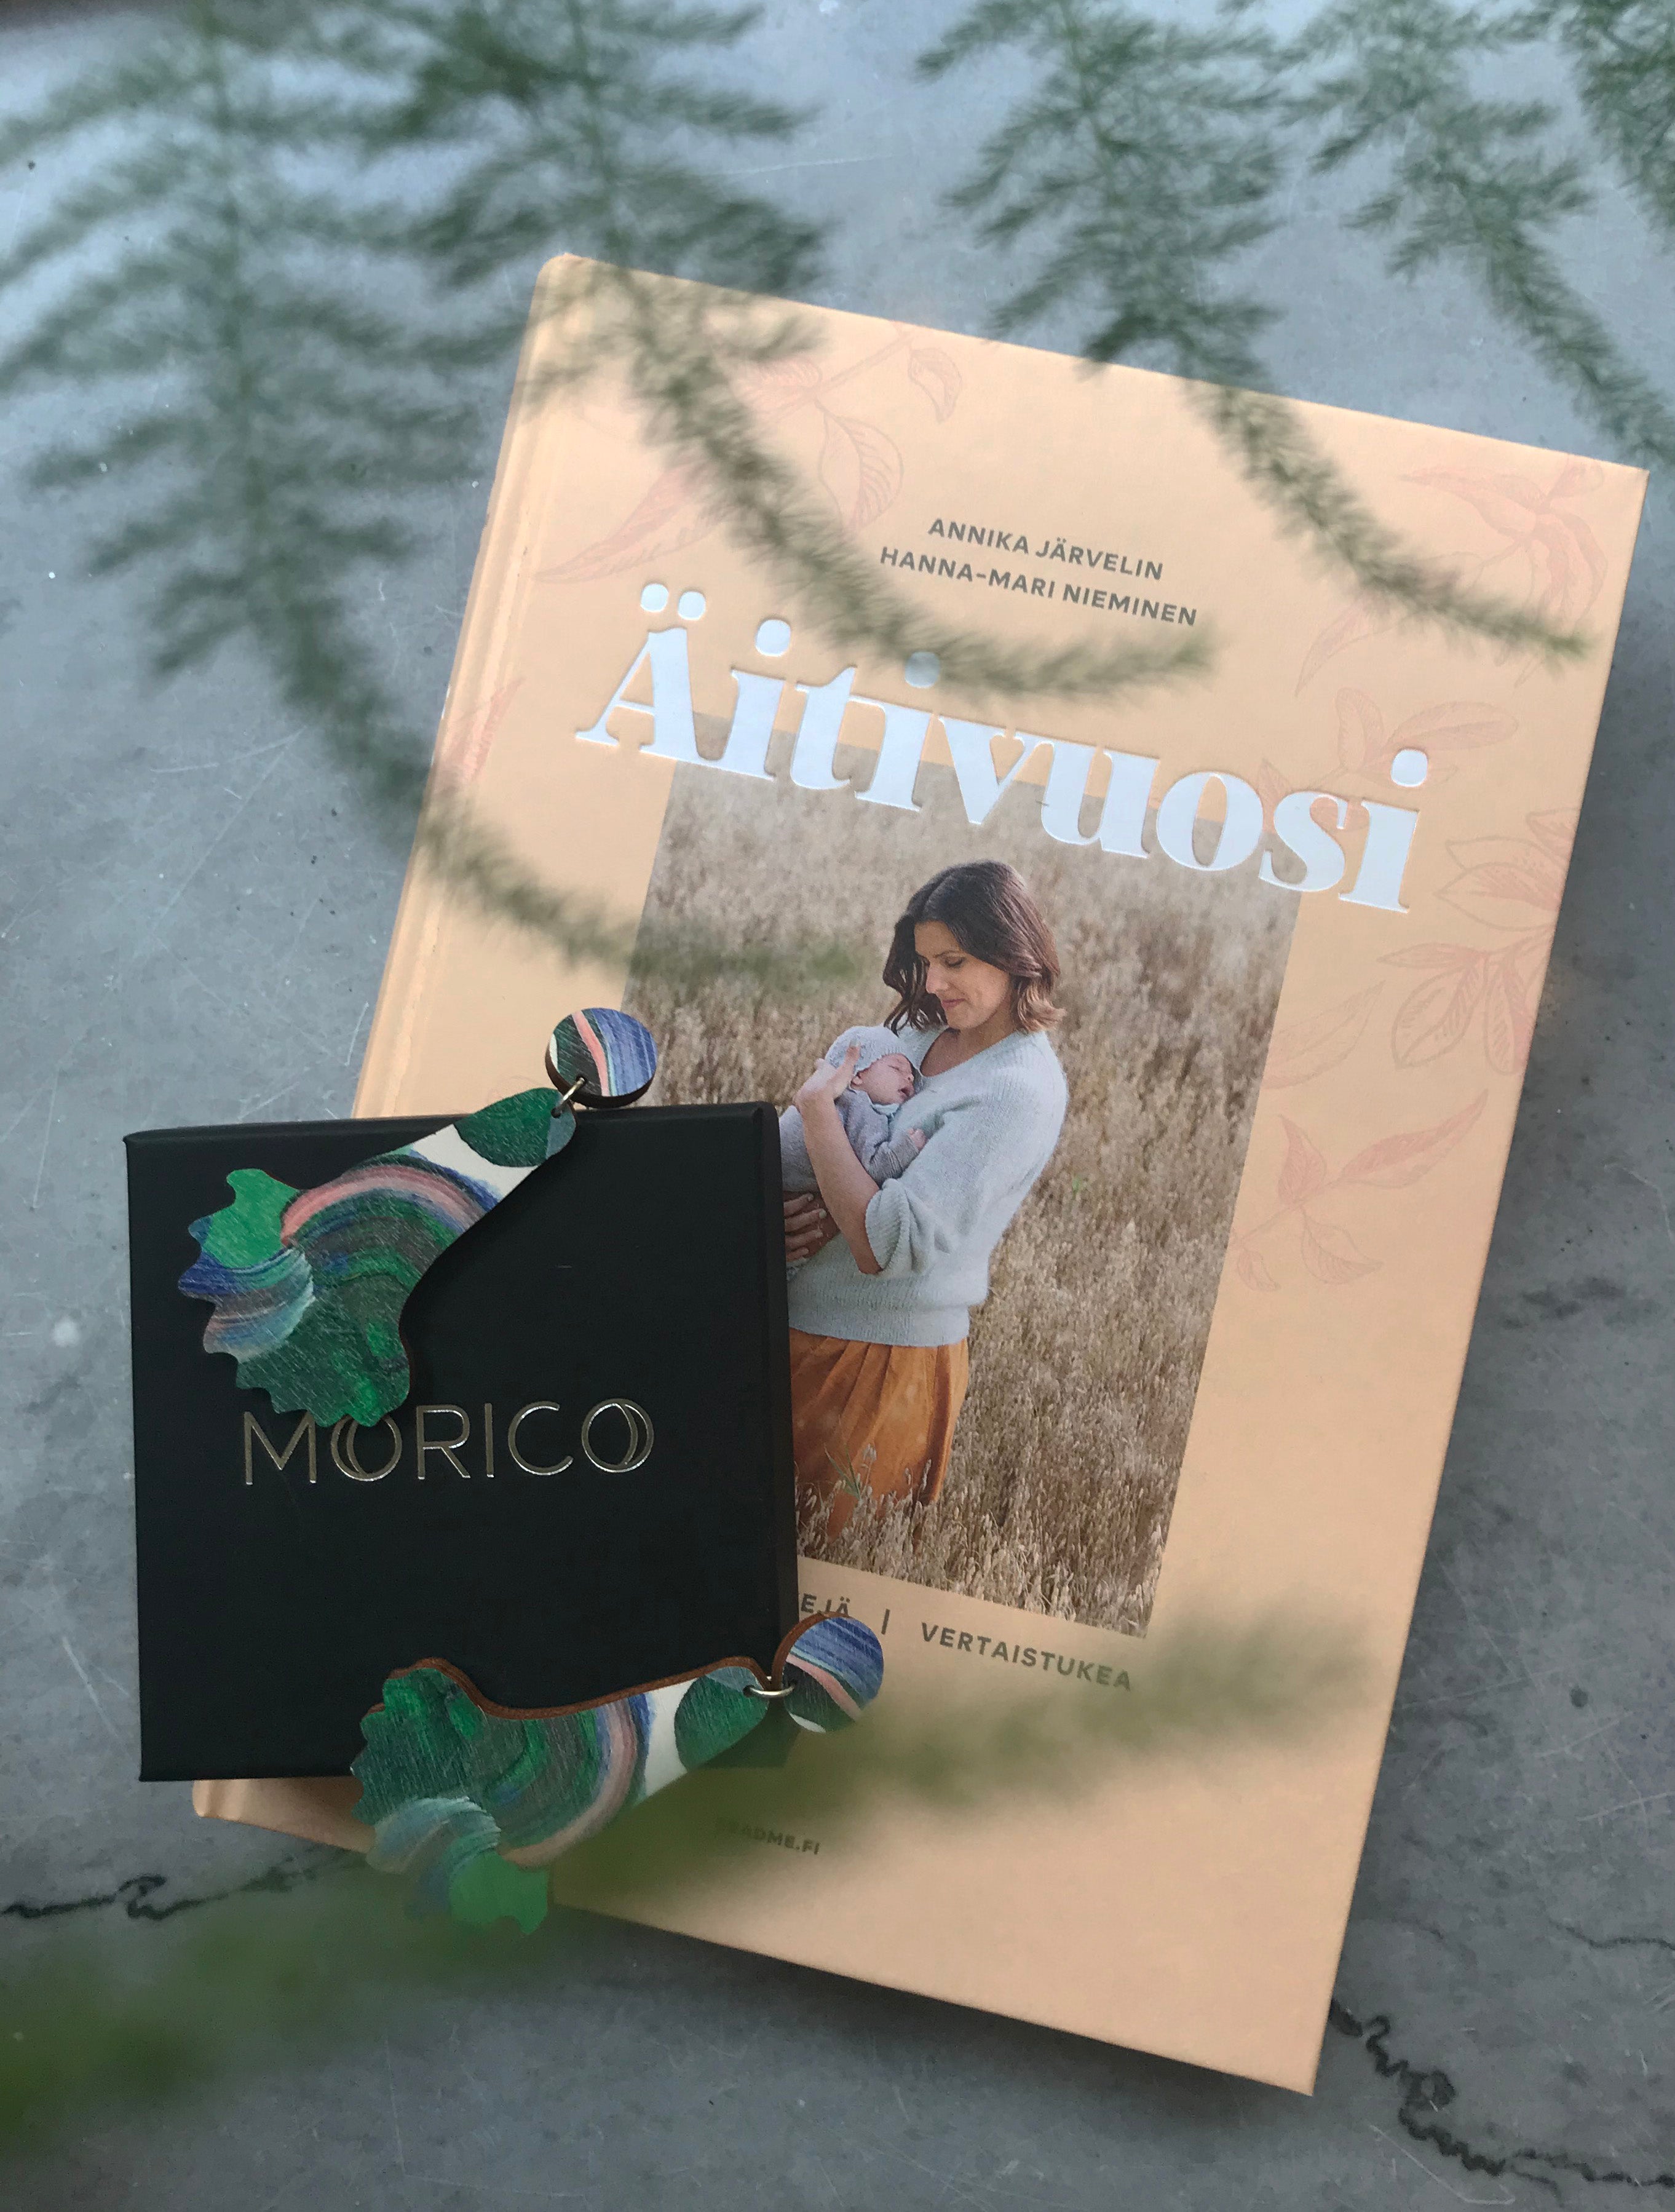 Aitivuosi book - Sustainable gift idea for mother's day